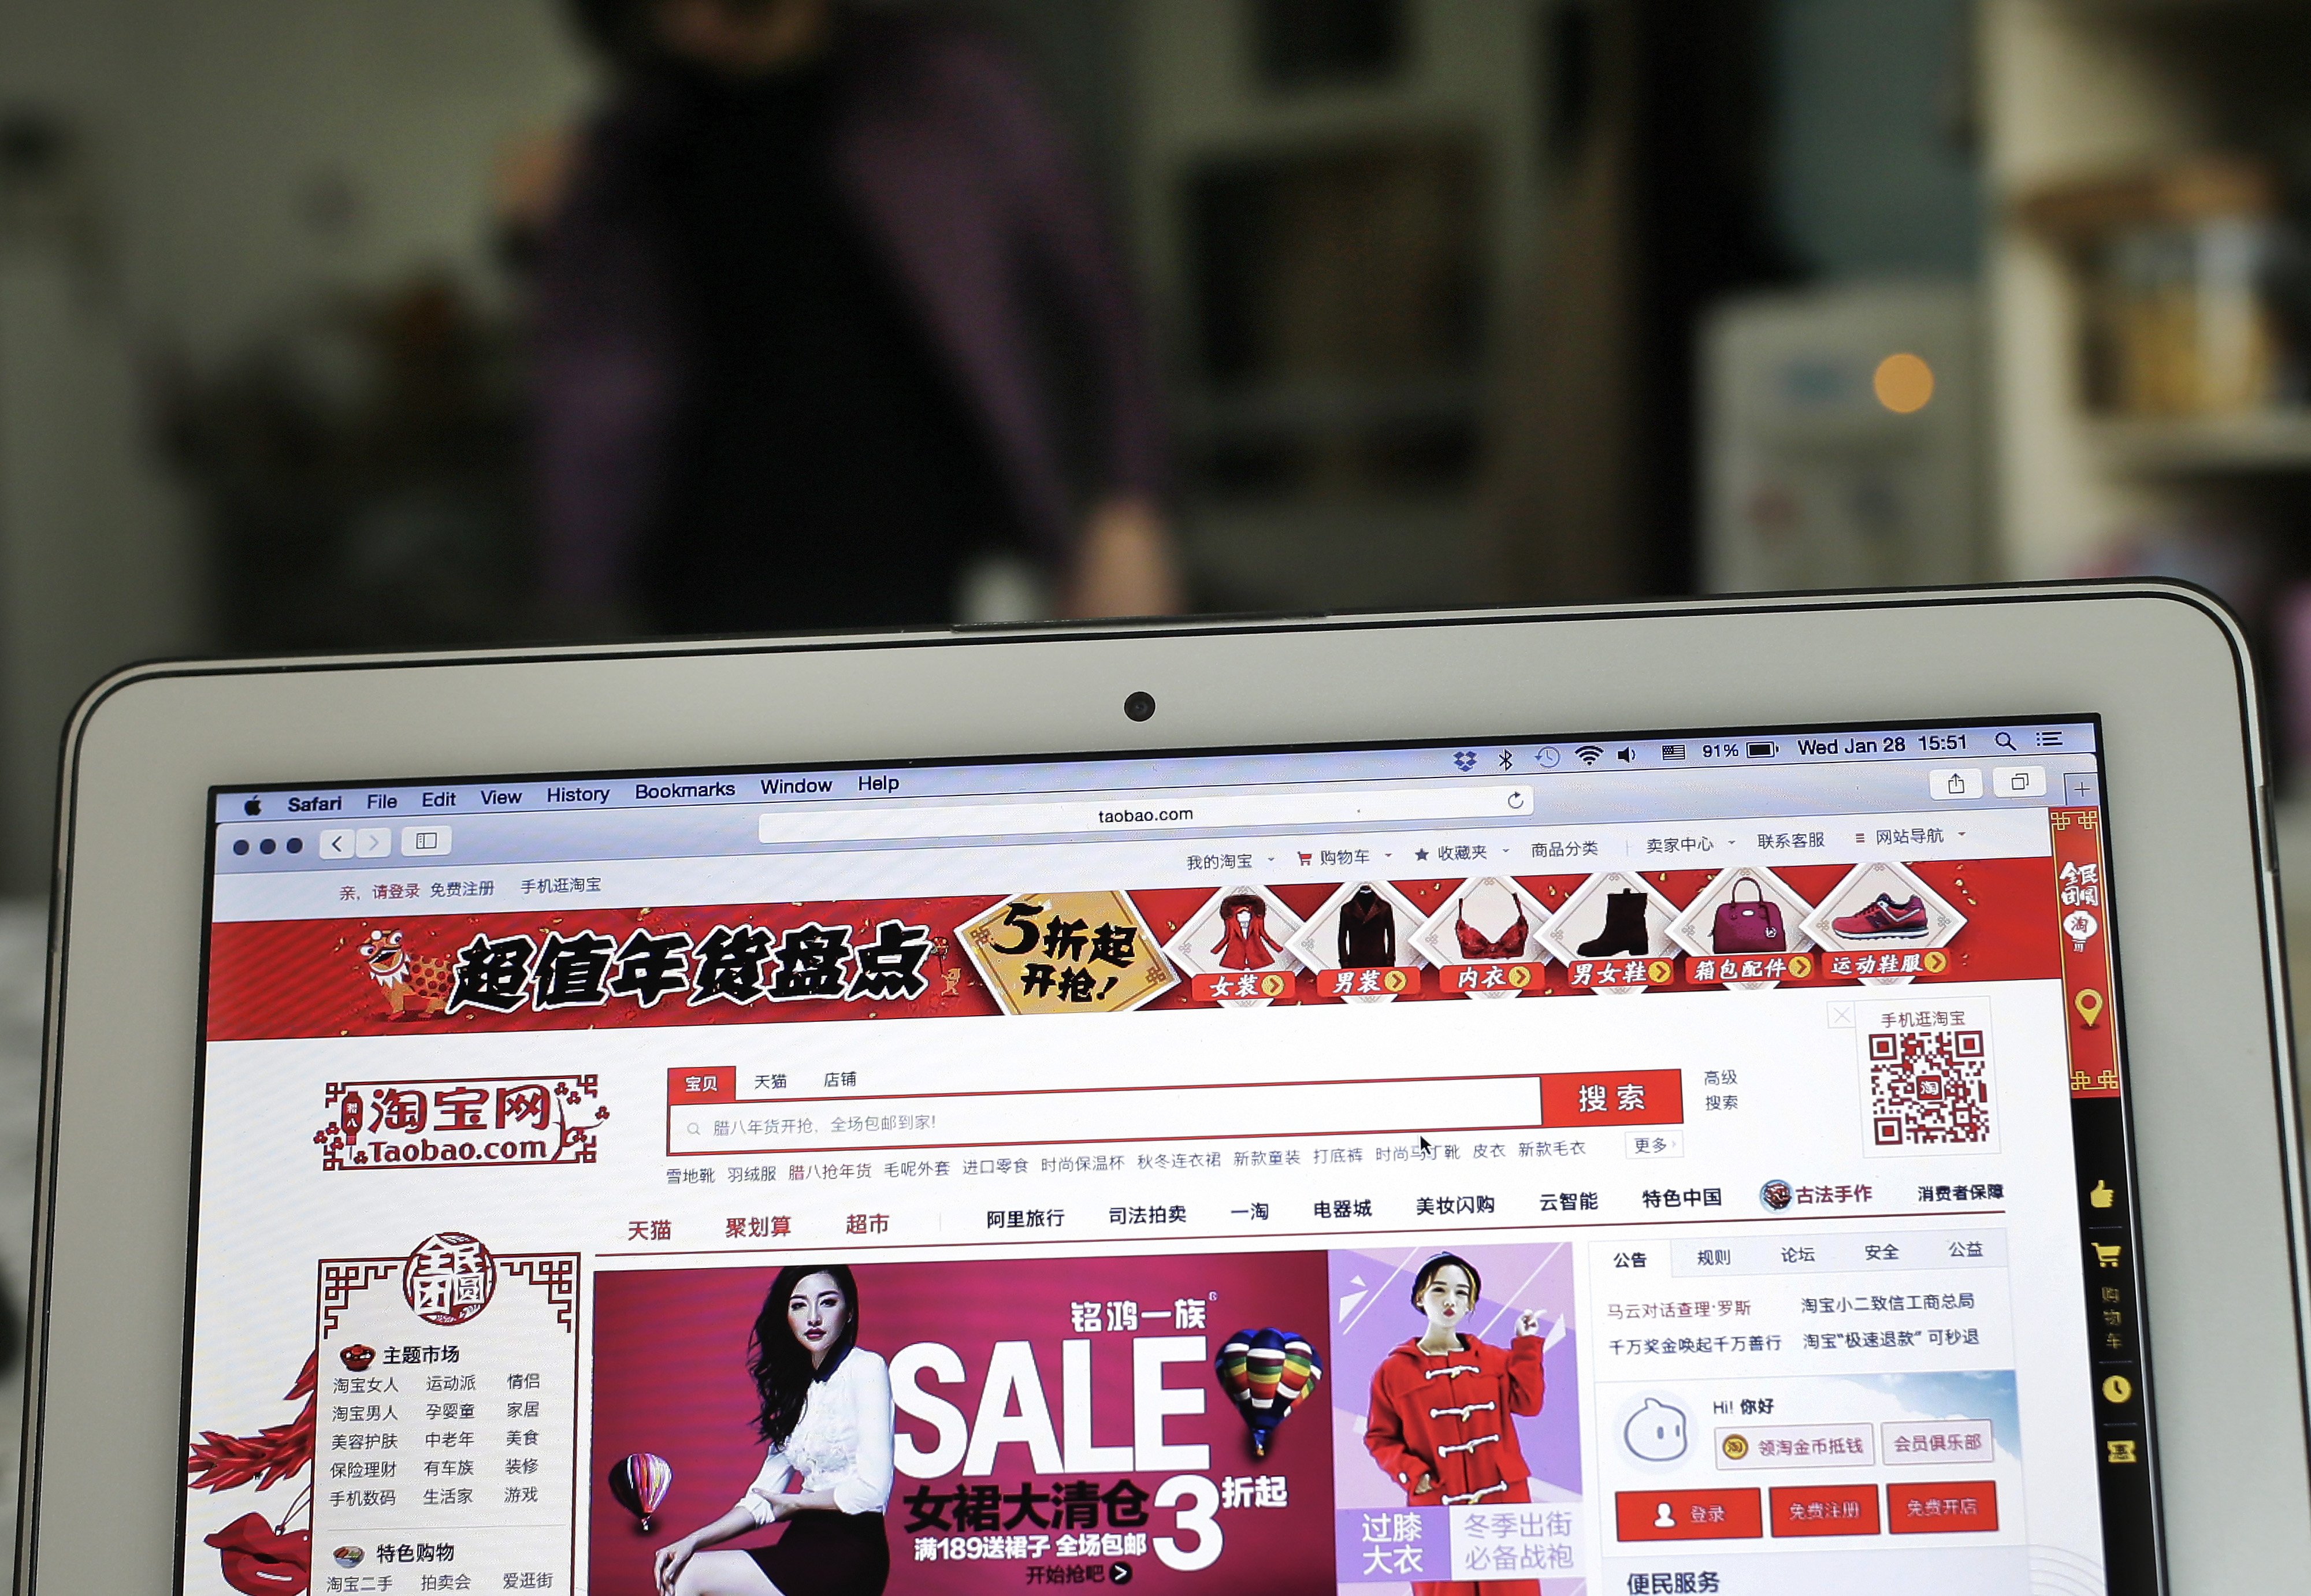 New rules for logistics could give a boost to e-commerce retailers like Alibaba's Taobao. Photo: AP